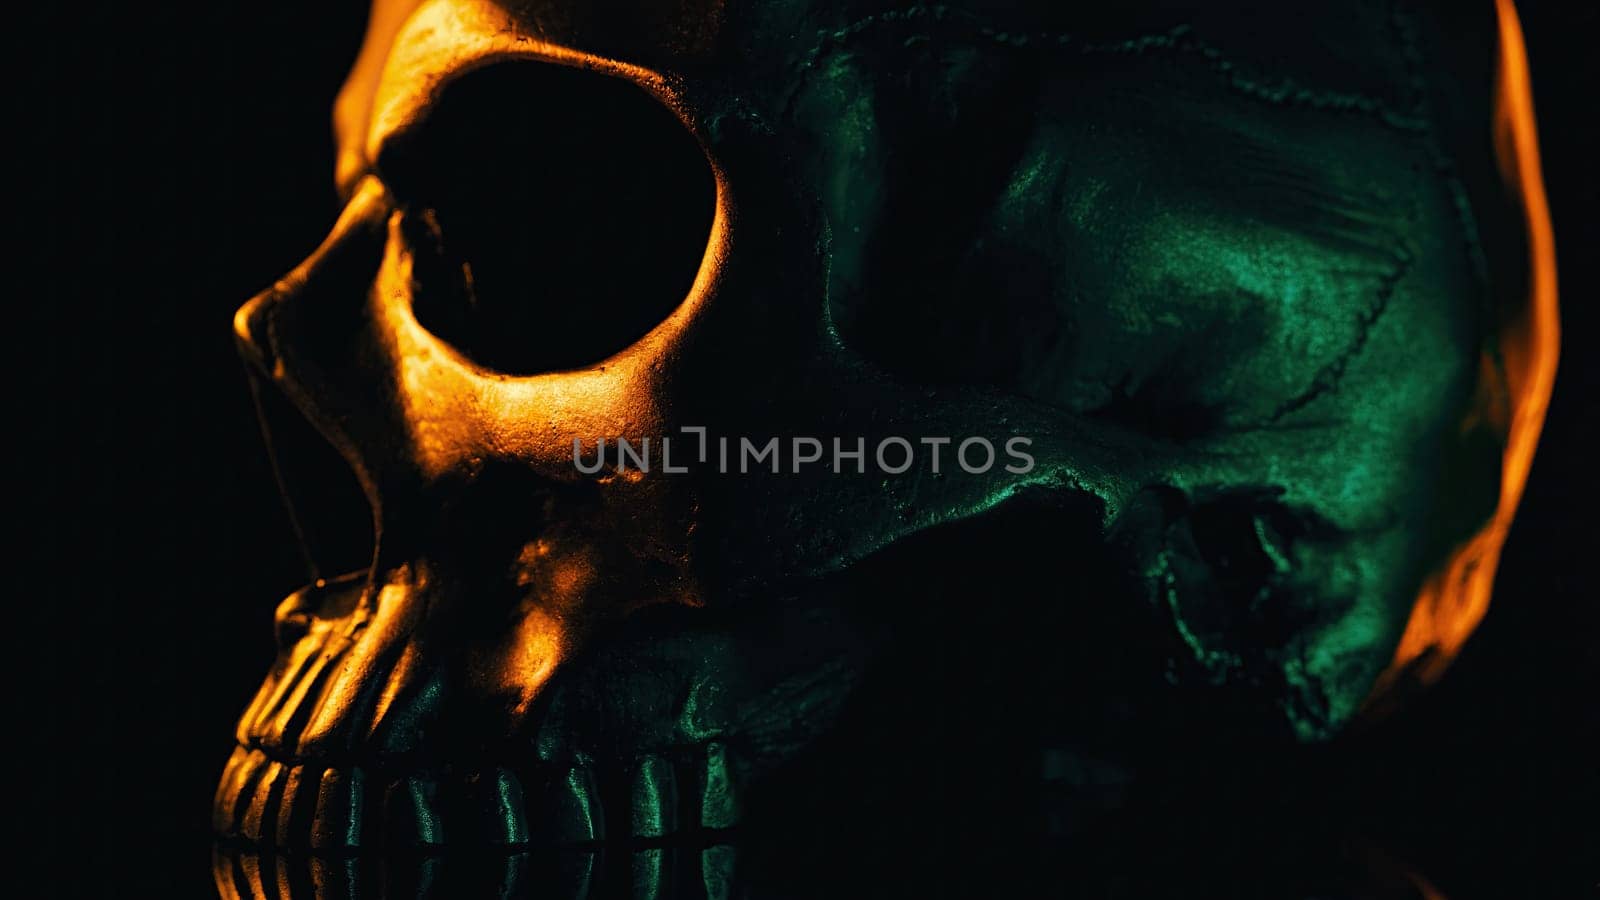 Human skull rotates on black background with neon colorful light. Halloween celebration, mystique, glamour, style concept. Power of symbolism - mortality, rebellion. Visual dramatic metaphor.